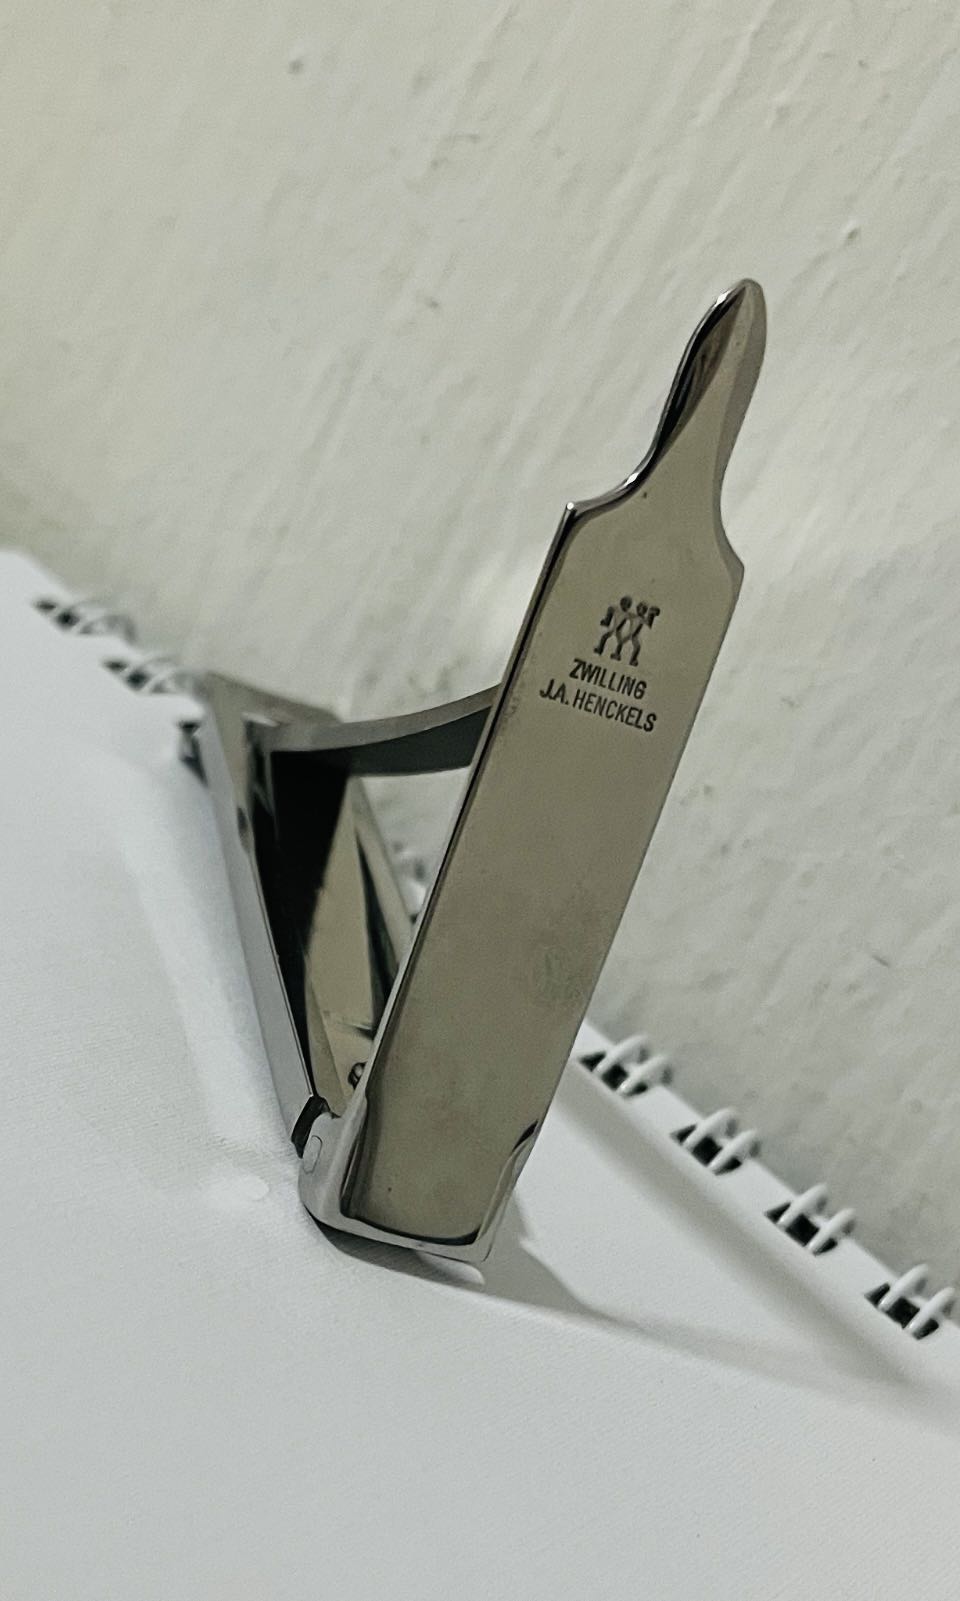 Zwilling J.A. Henckels Nail Clippers Review 2022